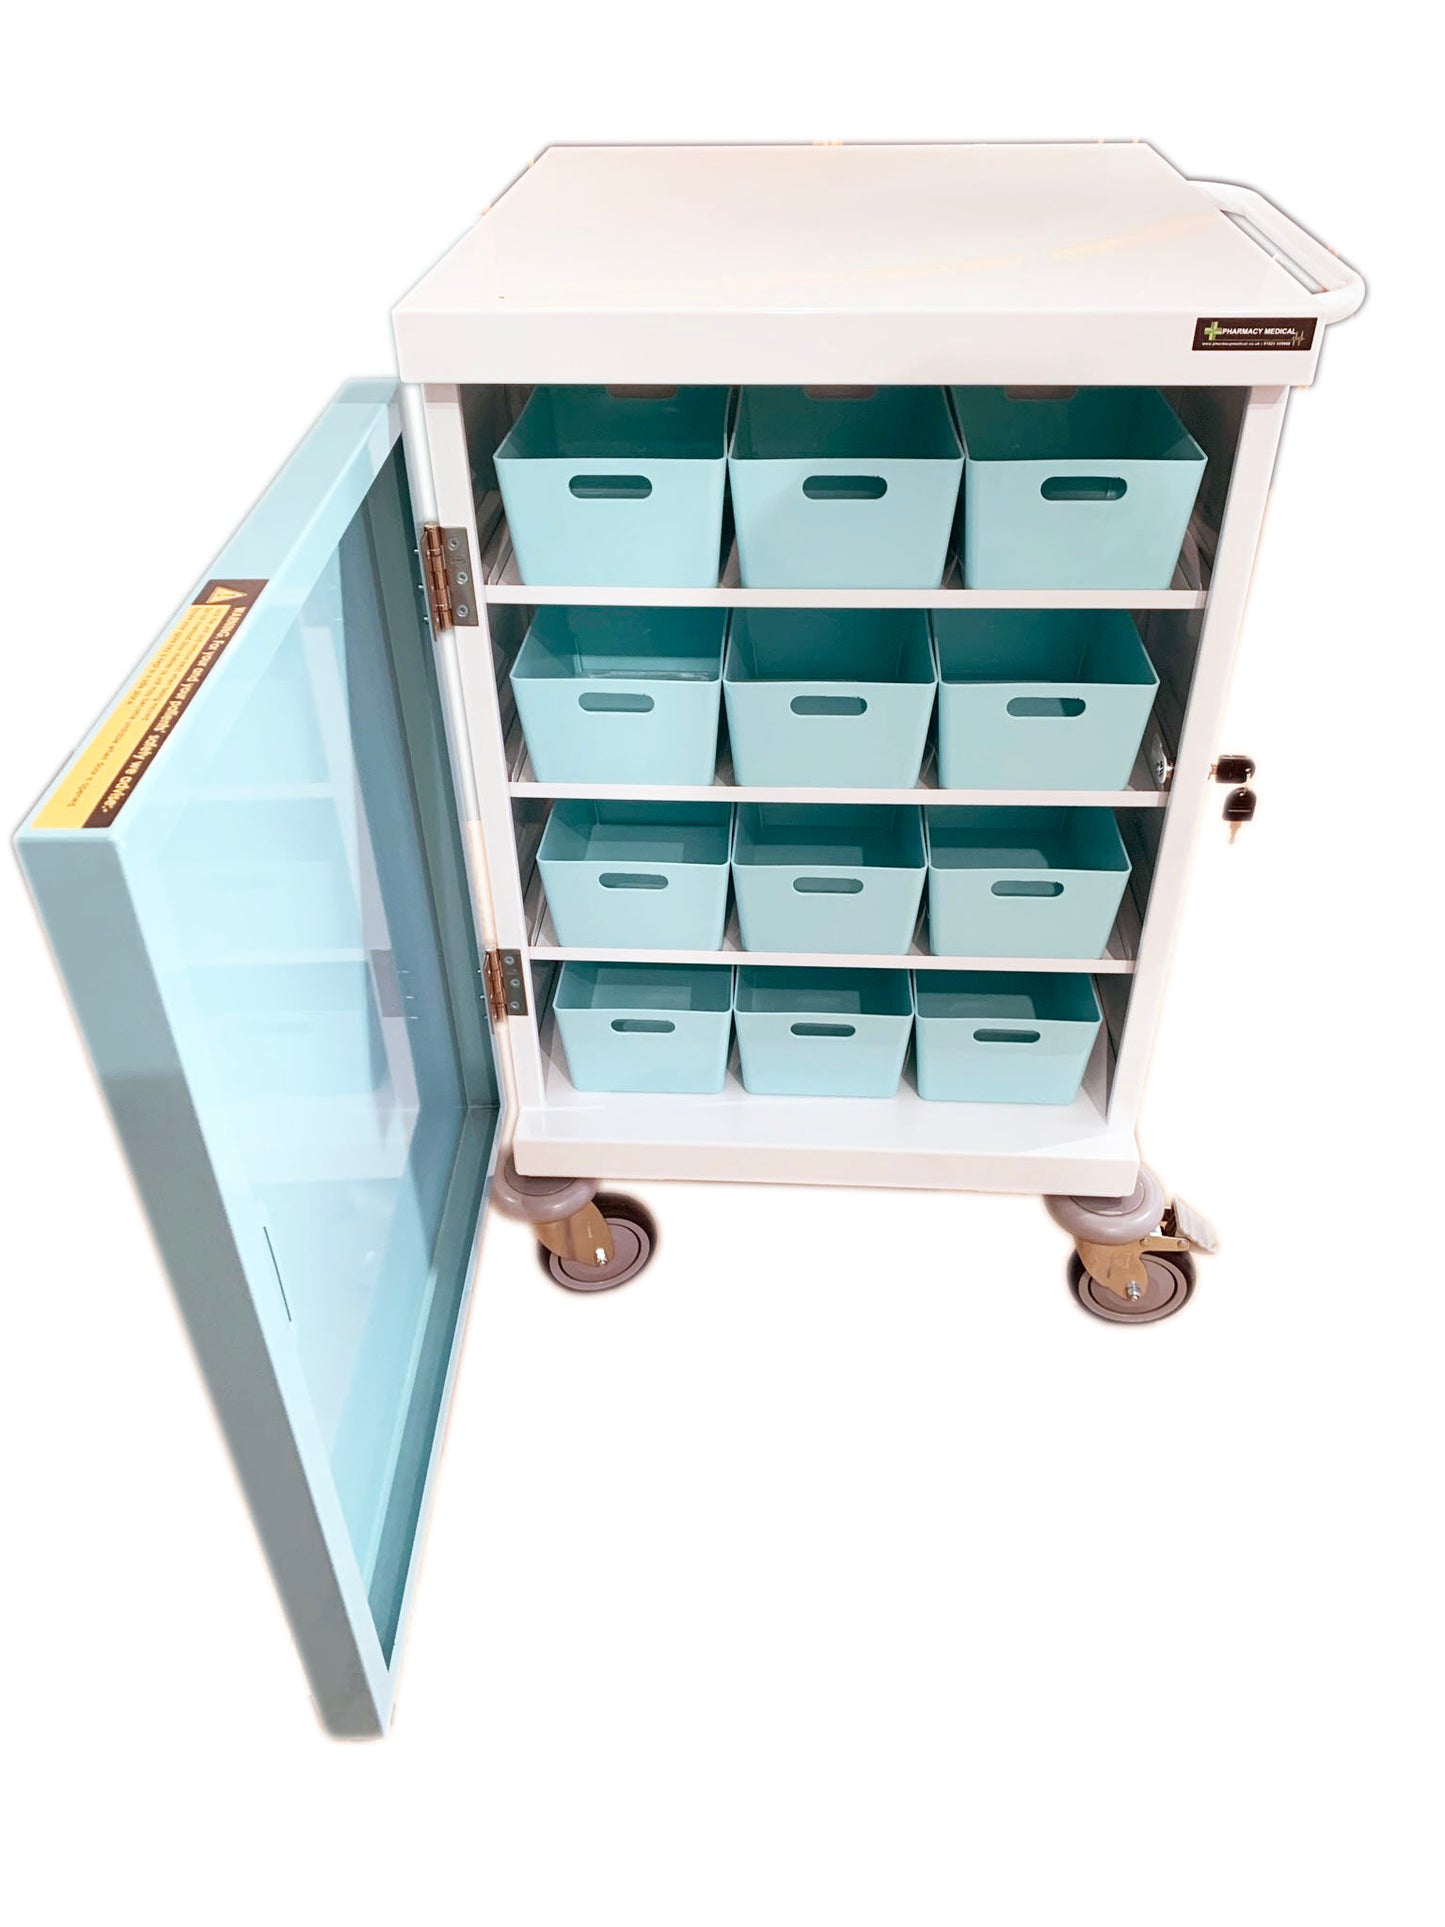 Pharmacy Medical - HECT665 24 TRAY ORIGINAL PACKAGING TROLLEY | 12 TEAL / 12 WHITE PLASTIC TRAYS | DOUBLE DOOR / CAM LOCK